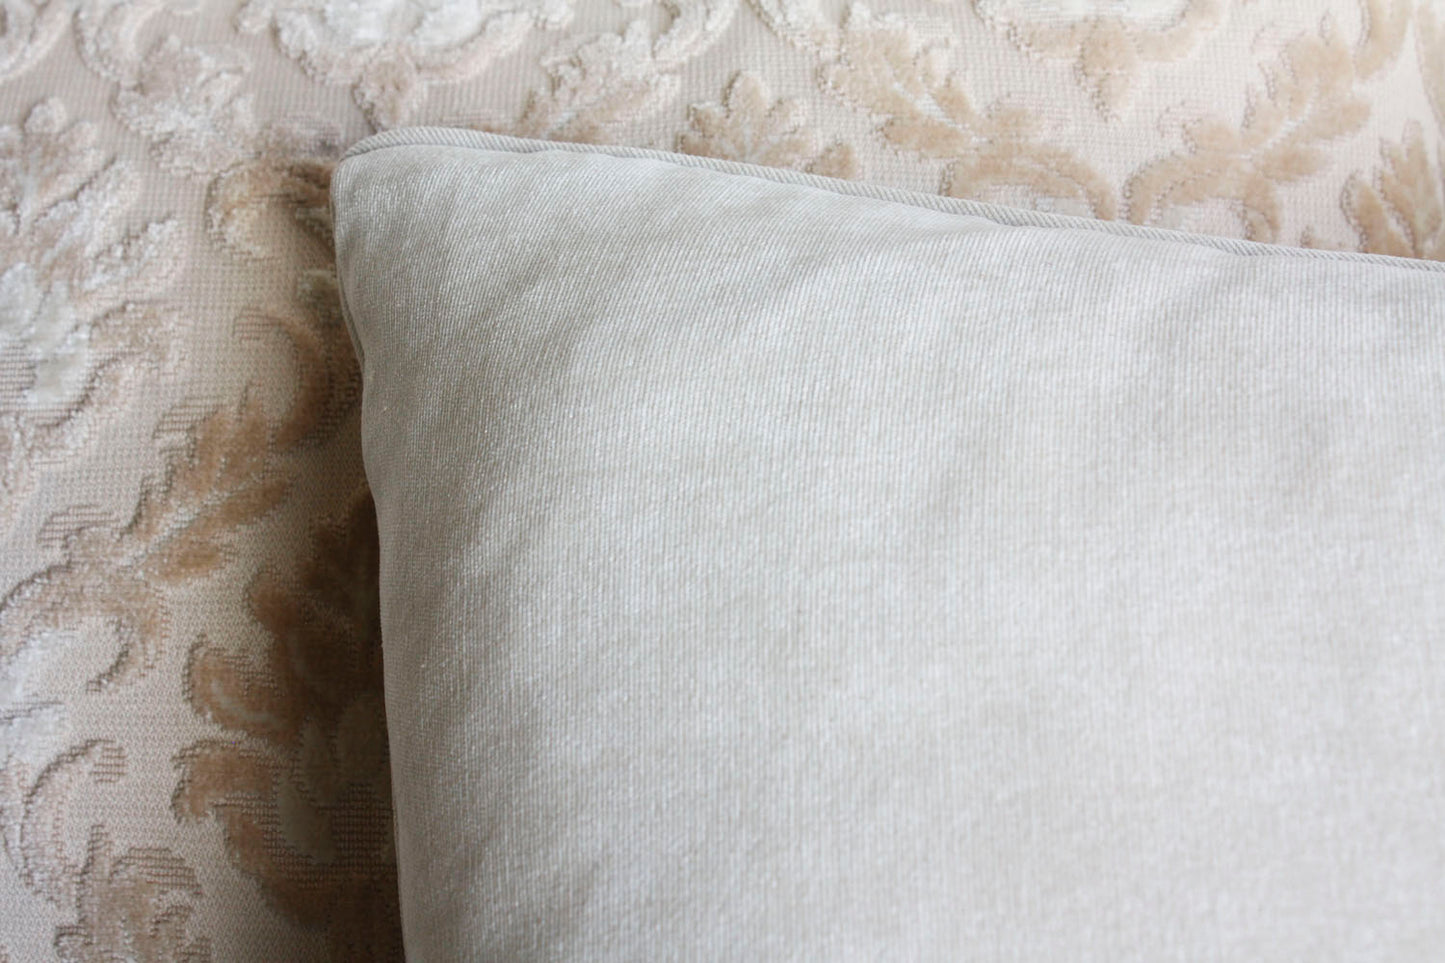 Early 1900 Pillows with Raised Floral Pattern & Ivory Velvet